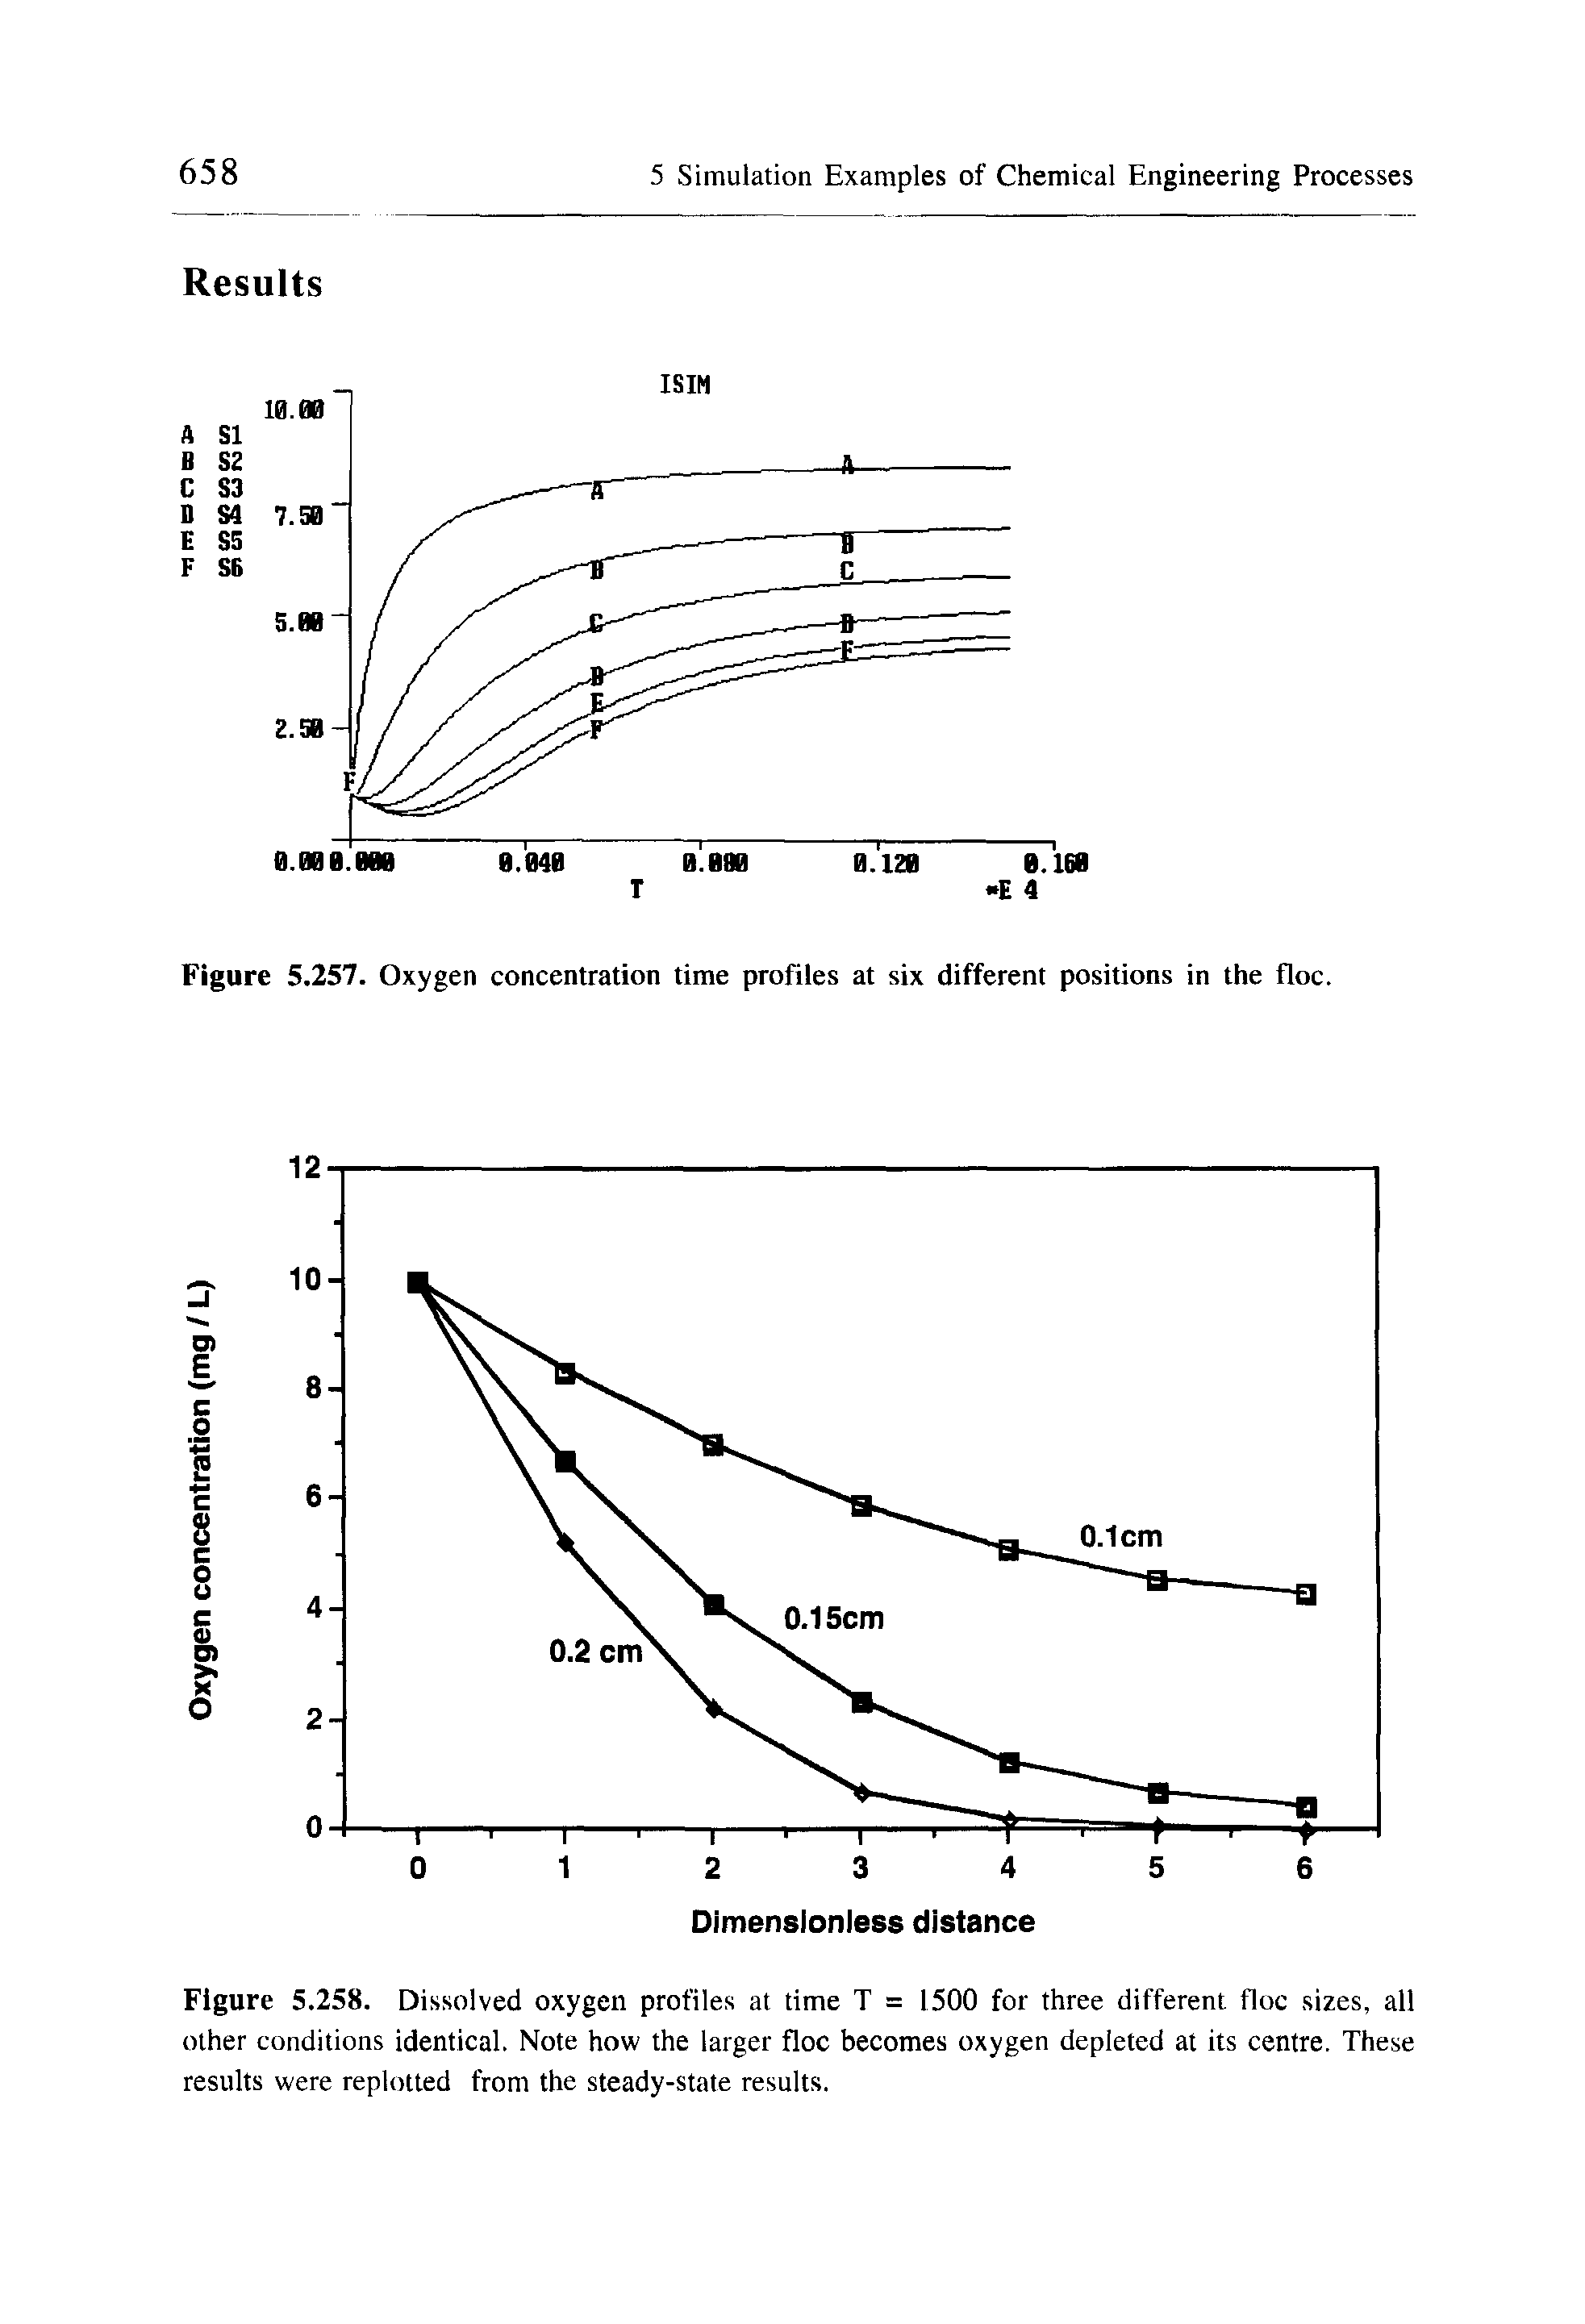 Figure 5.258. Dissolved oxygen profiles at time T = 1500 for three different floe sizes, all other conditions identical. Note how the larger floe becomes oxygen depleted at its centre. These results were replotted from the steady-state results.